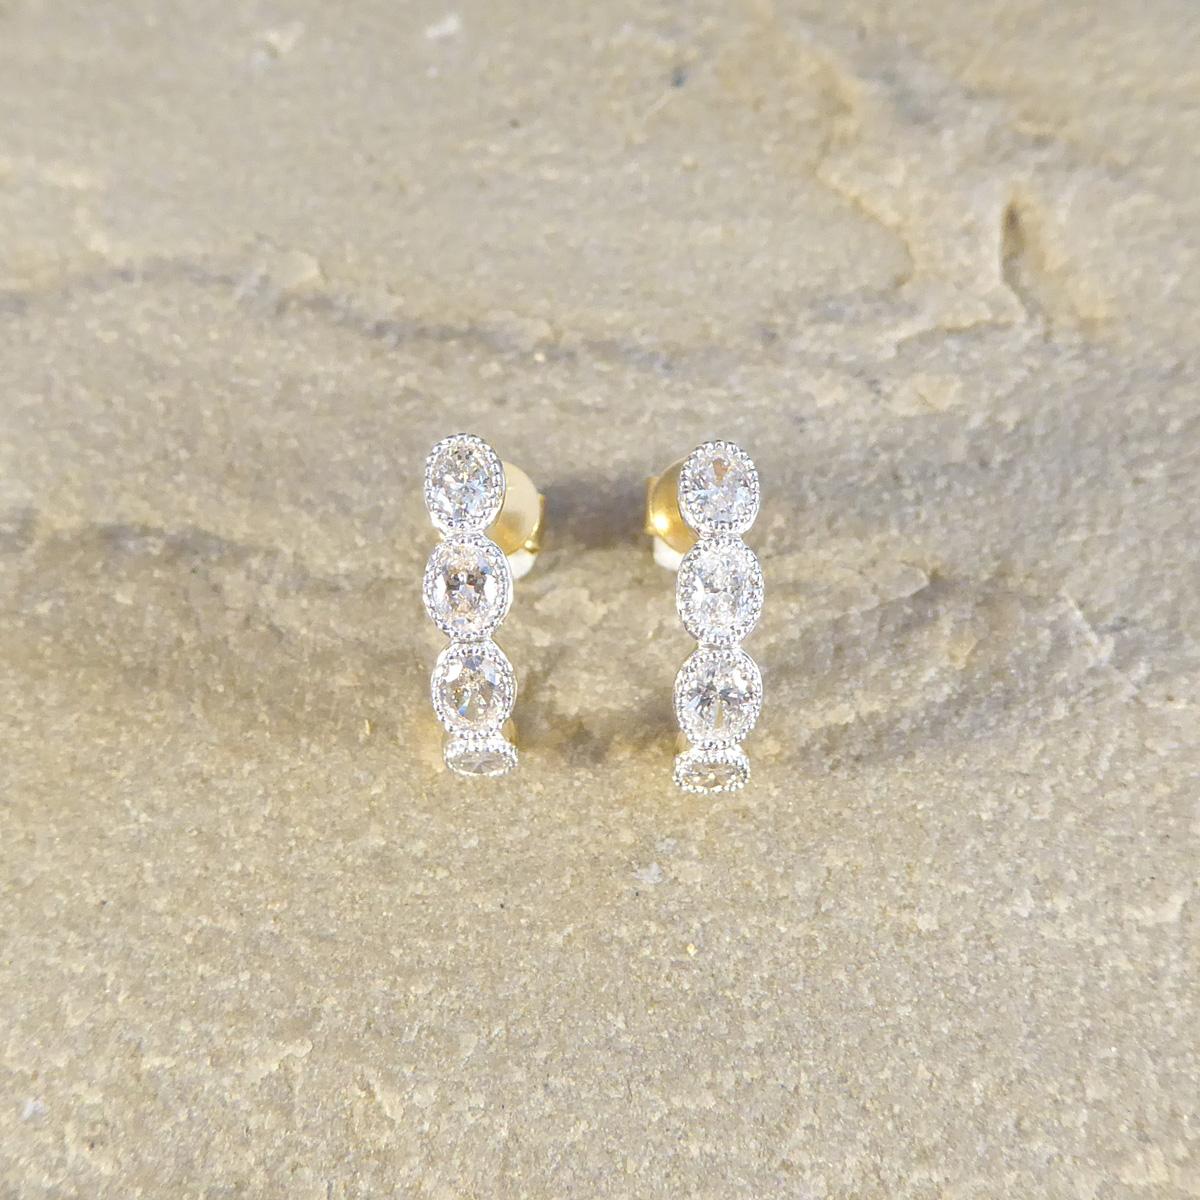 The most beautiful huggie hoop earrings set with Diamonds that sparkle throughout. Each half hoop are set with four Oval Cut Diamonds of equal colour and clarity in a rub over millegrain detailed setting in 18ct White Gold to compliment the stones,